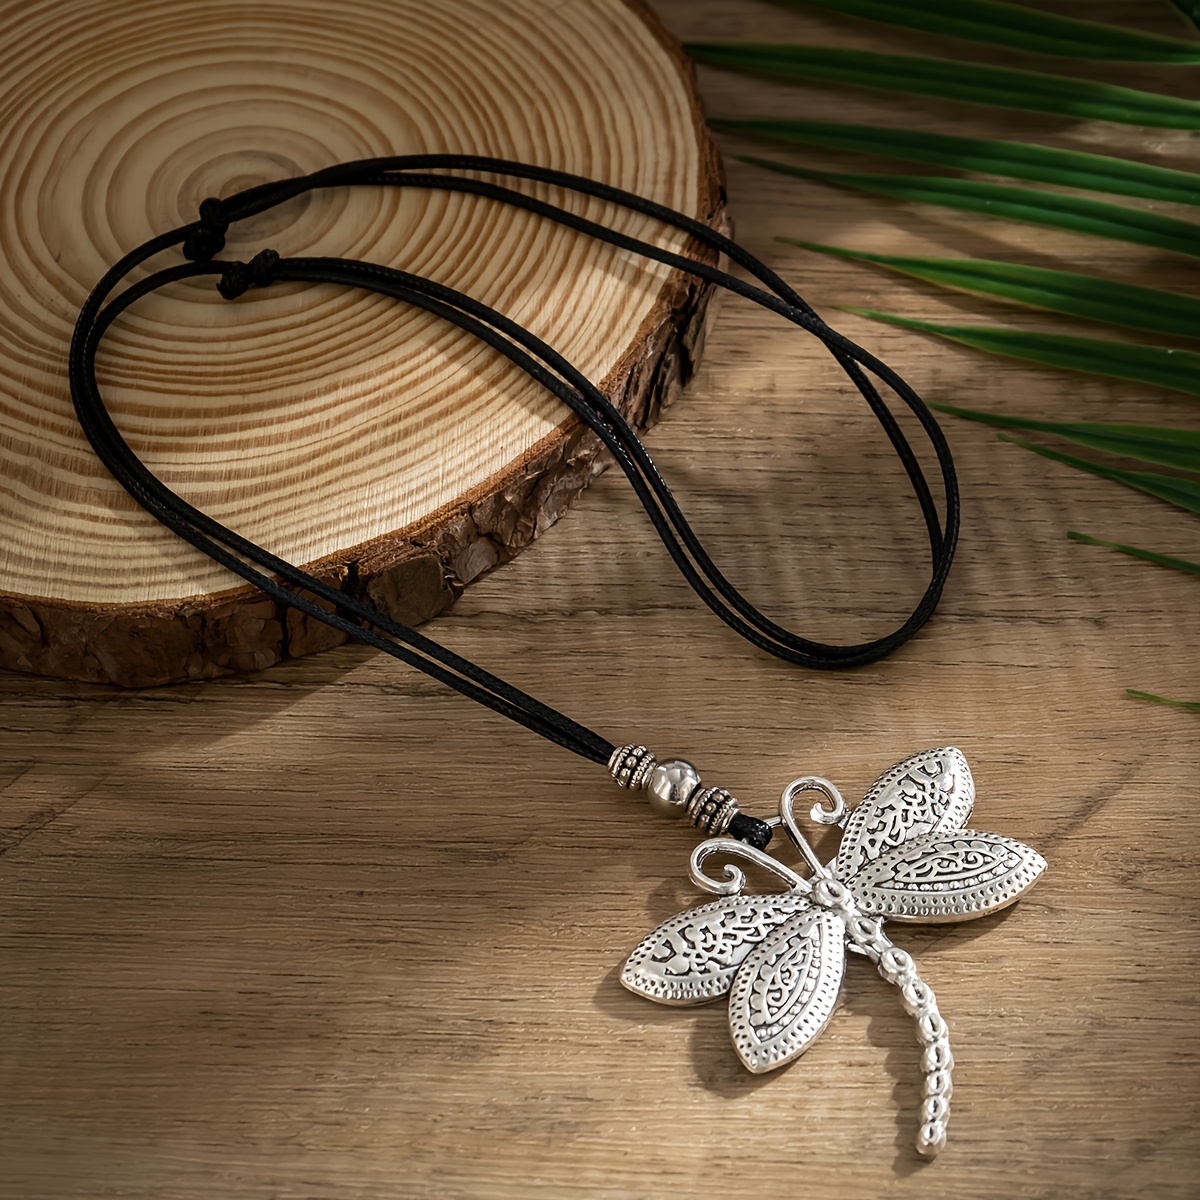 

Boho Ethnic Style Adjustable Design Retro Classic Wax Rope Long Necklace Personality Dragonfly Pendant Neck Jewelry Gift